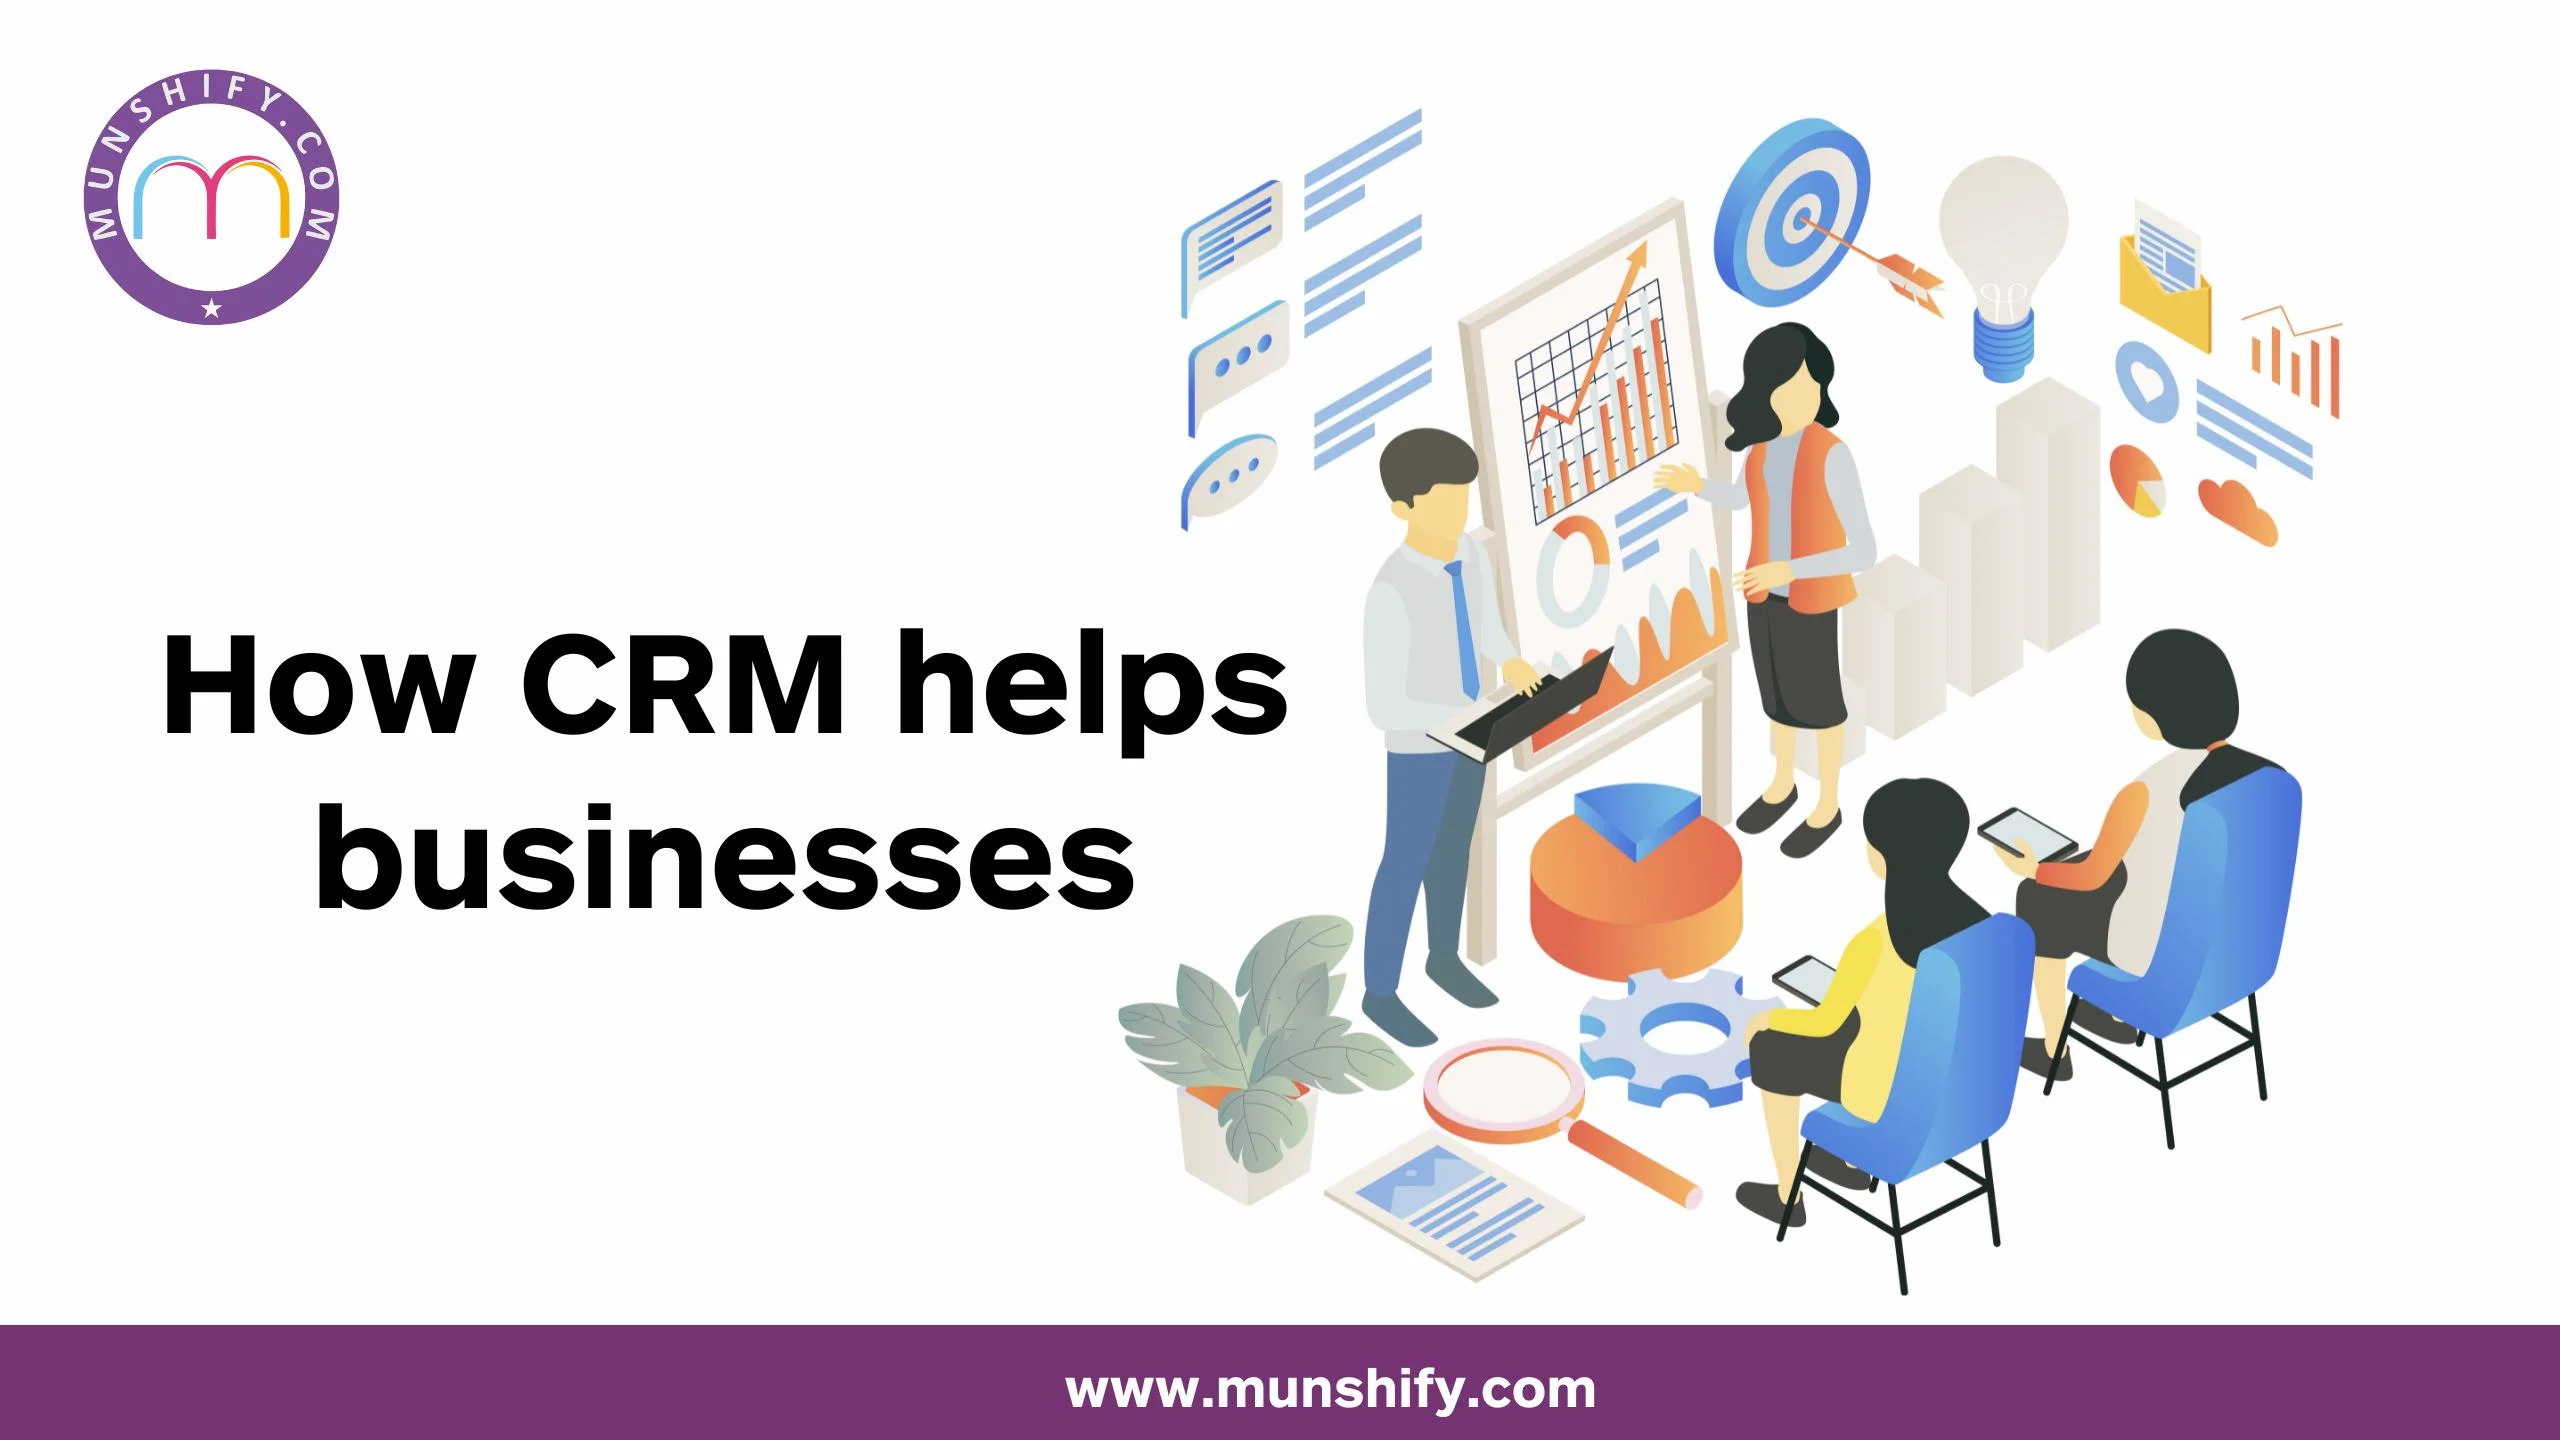 How CRM helps businesses